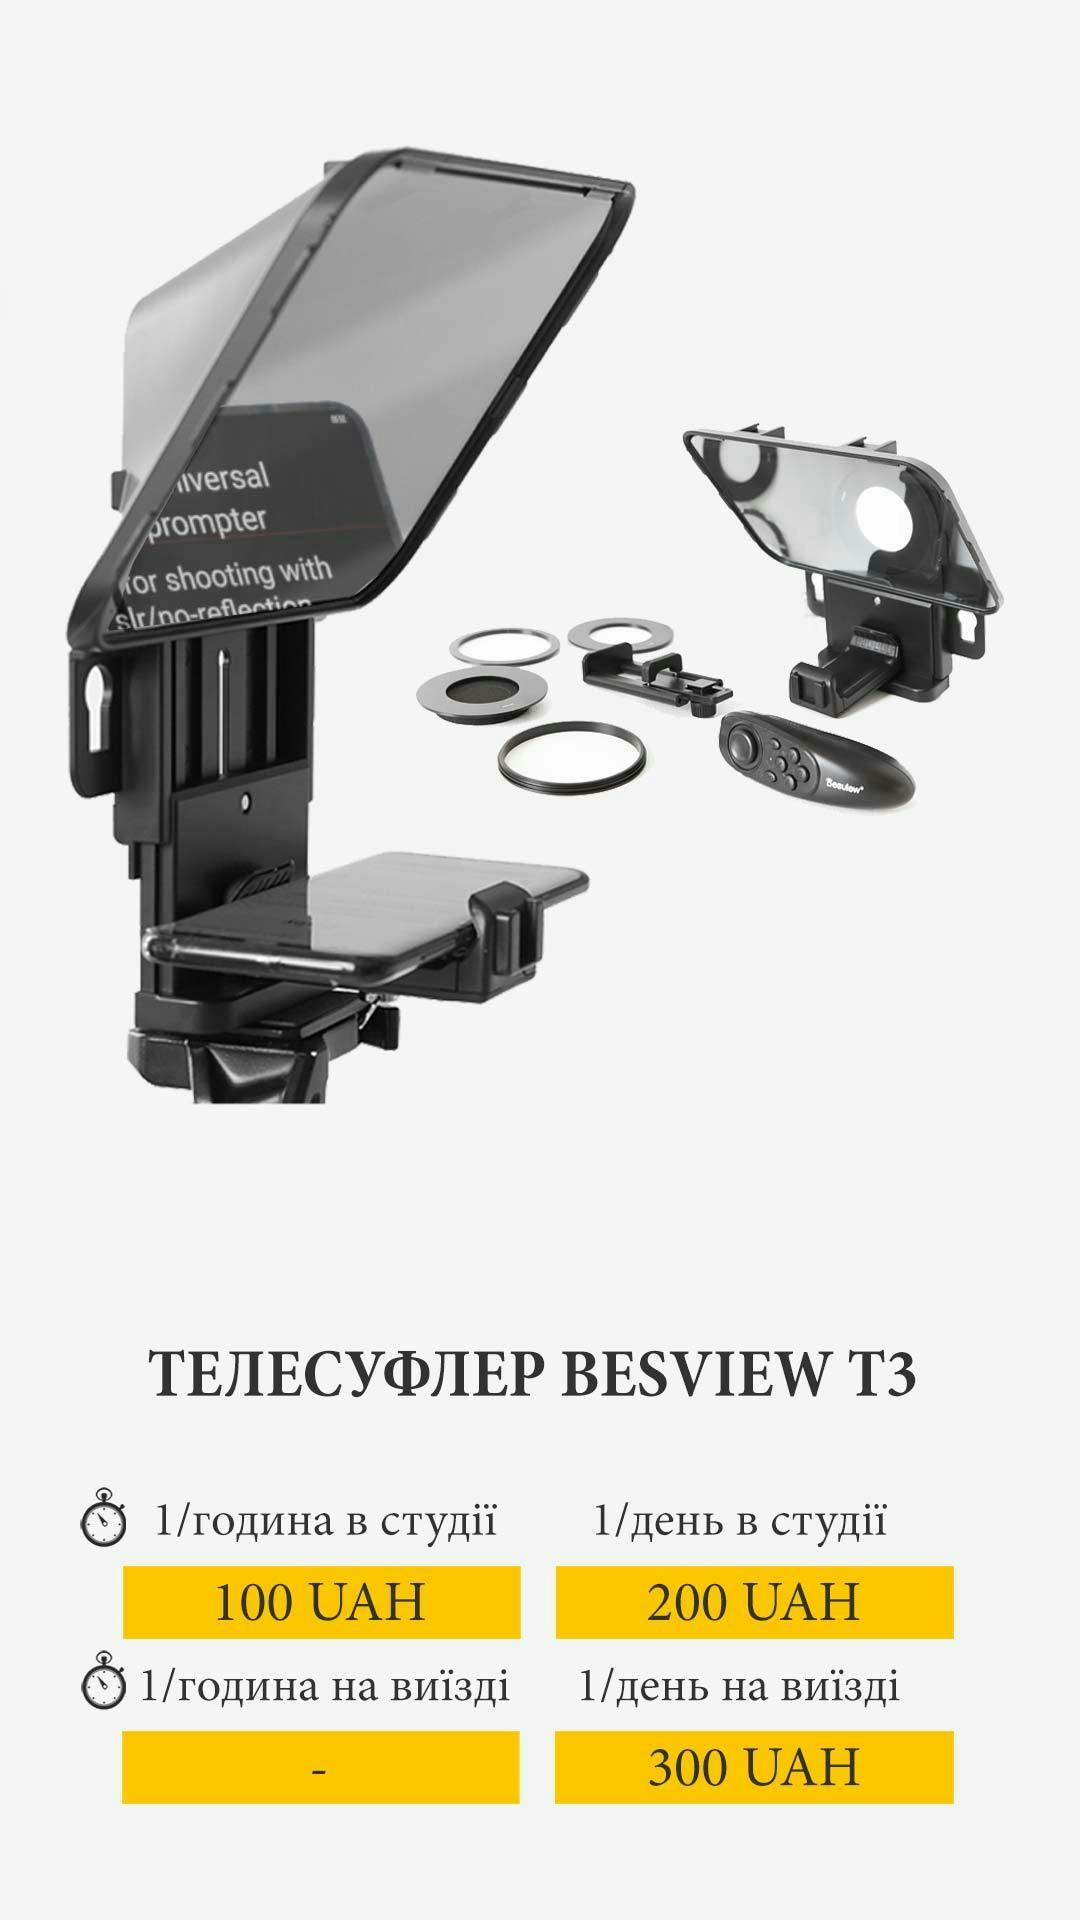 Cover image from besview-t3